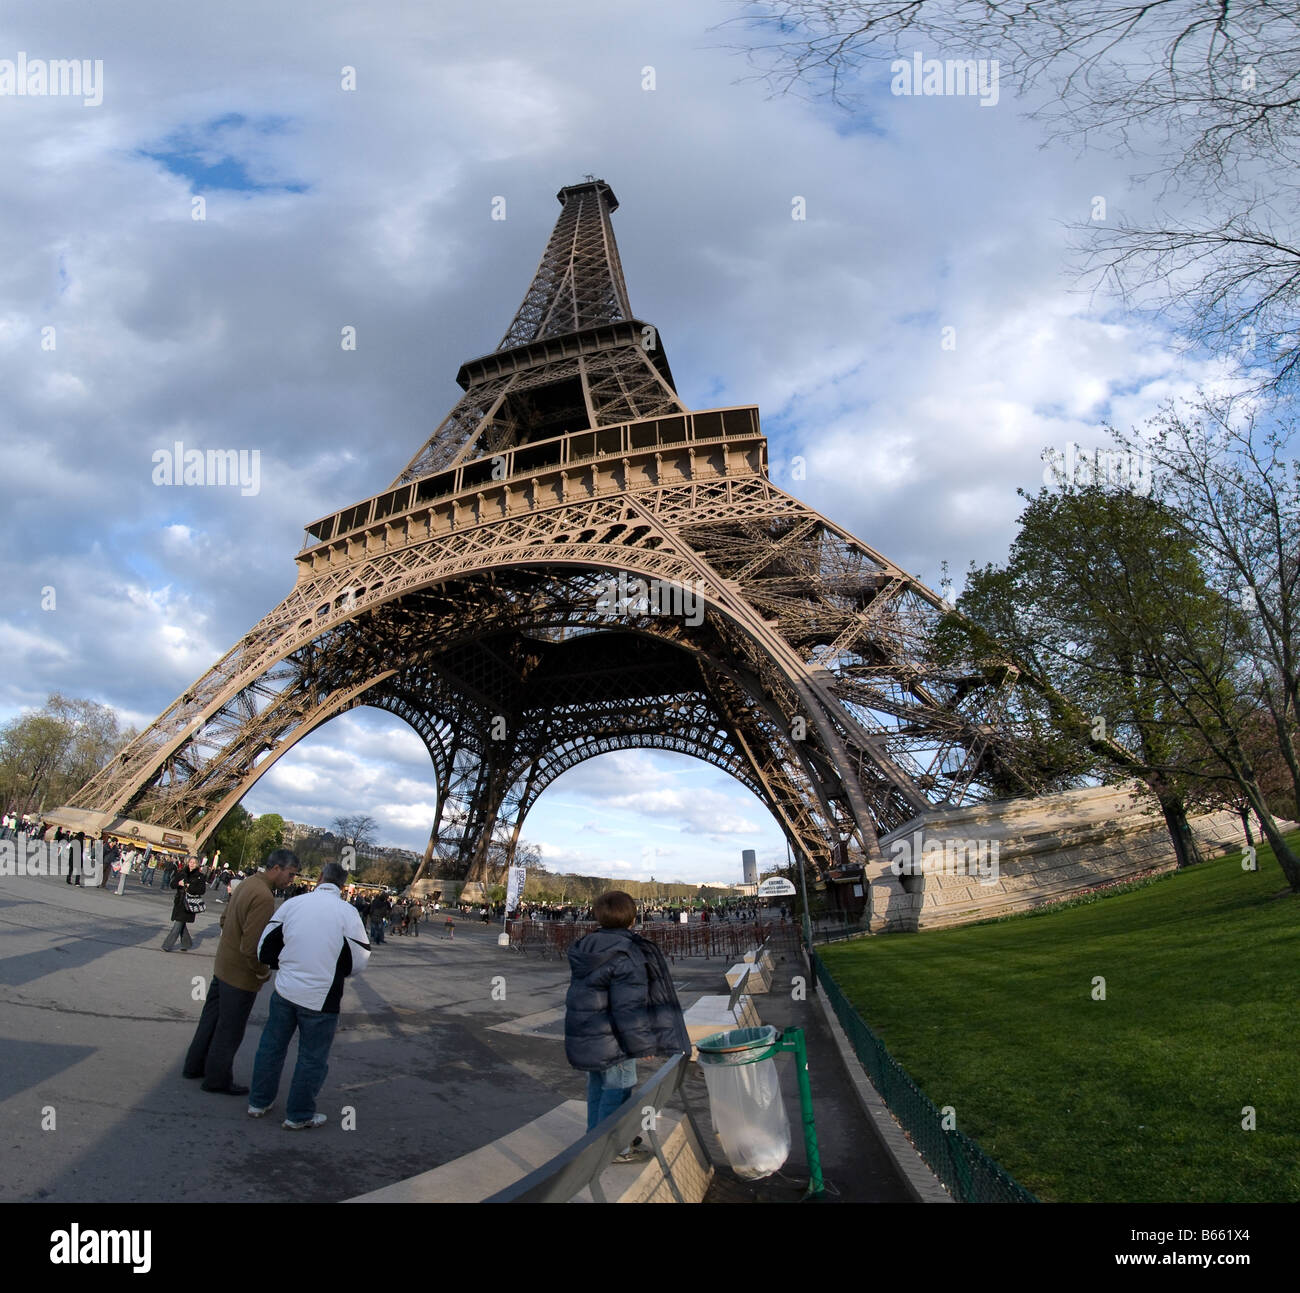 Fish-eye view of the Eiffel Tower, Paris, France by Charles W. Lupica Stock Photo